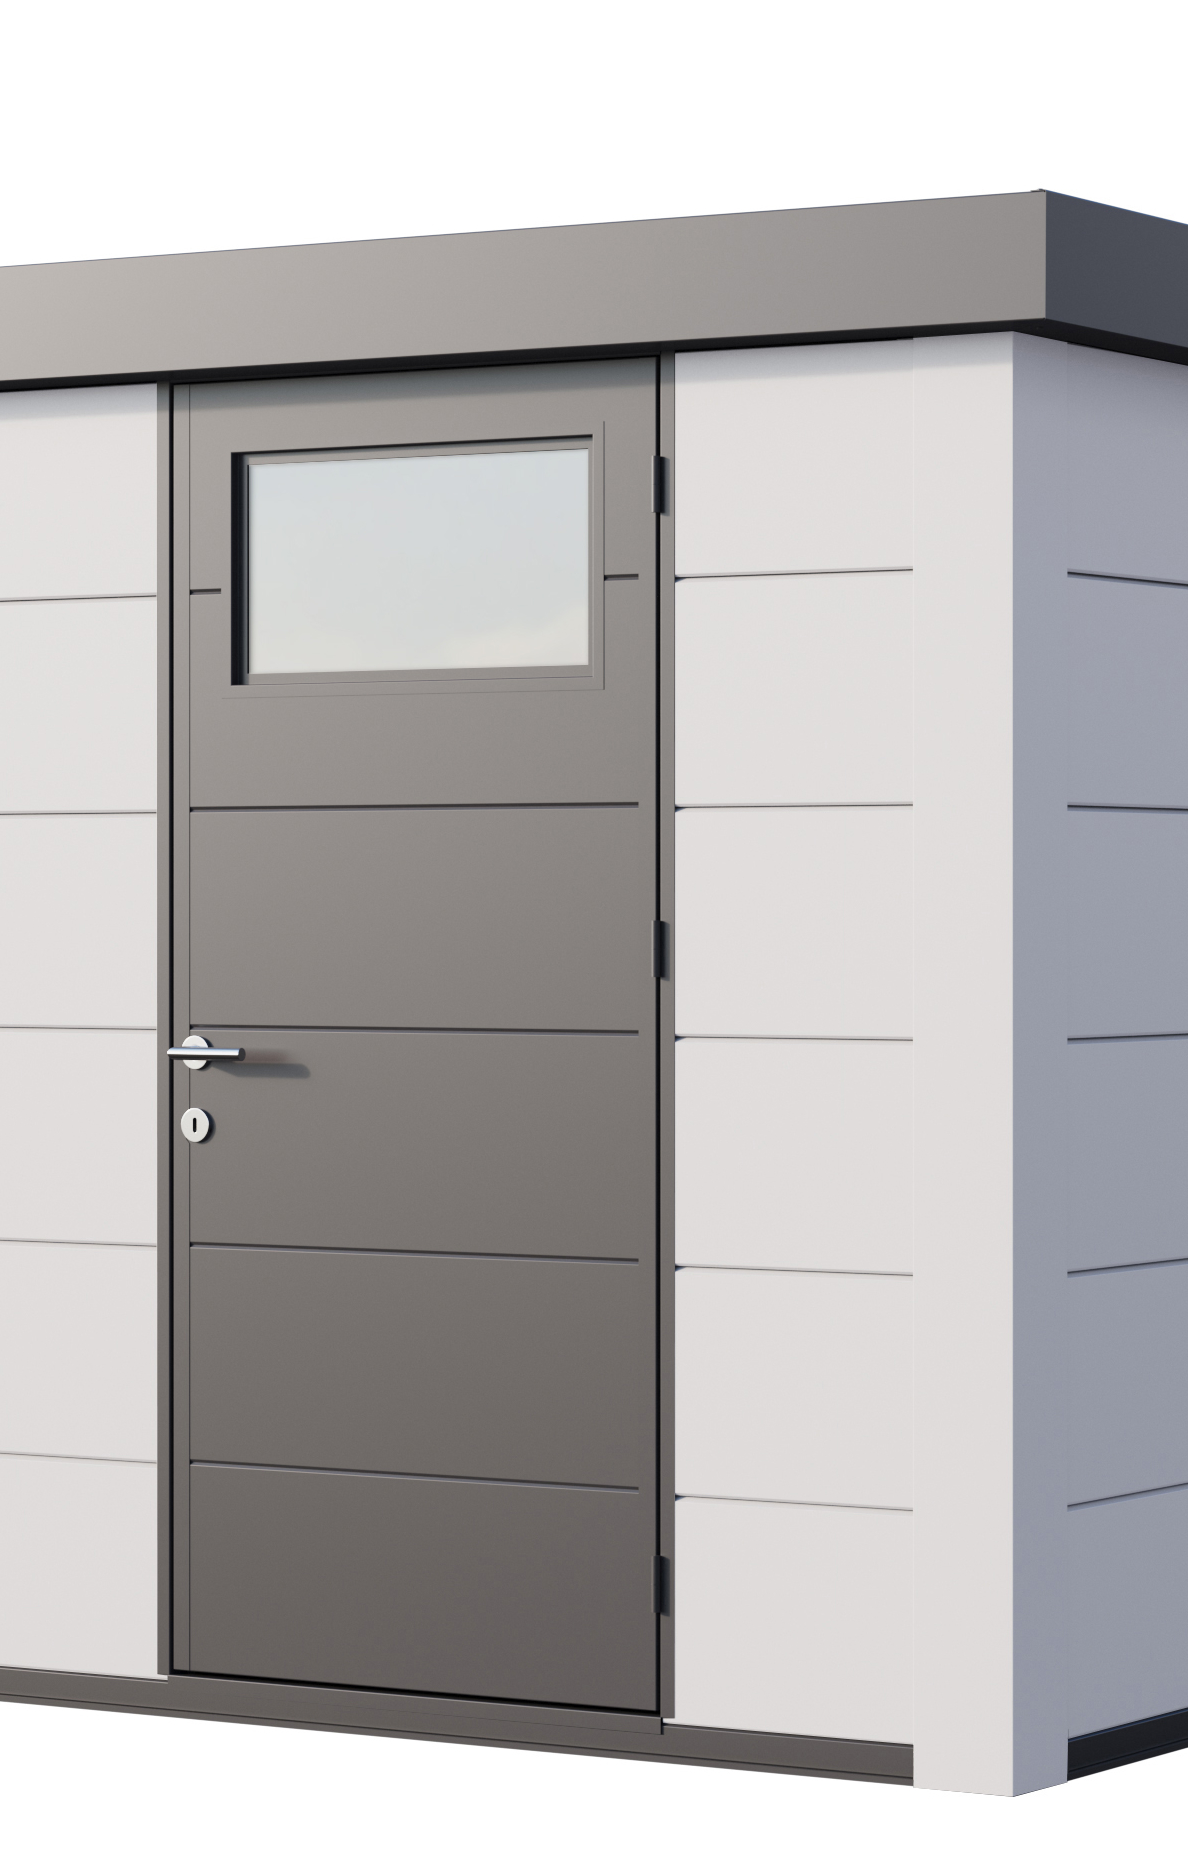 The Eleganto metal steel shed in white showing the door detail with glass.